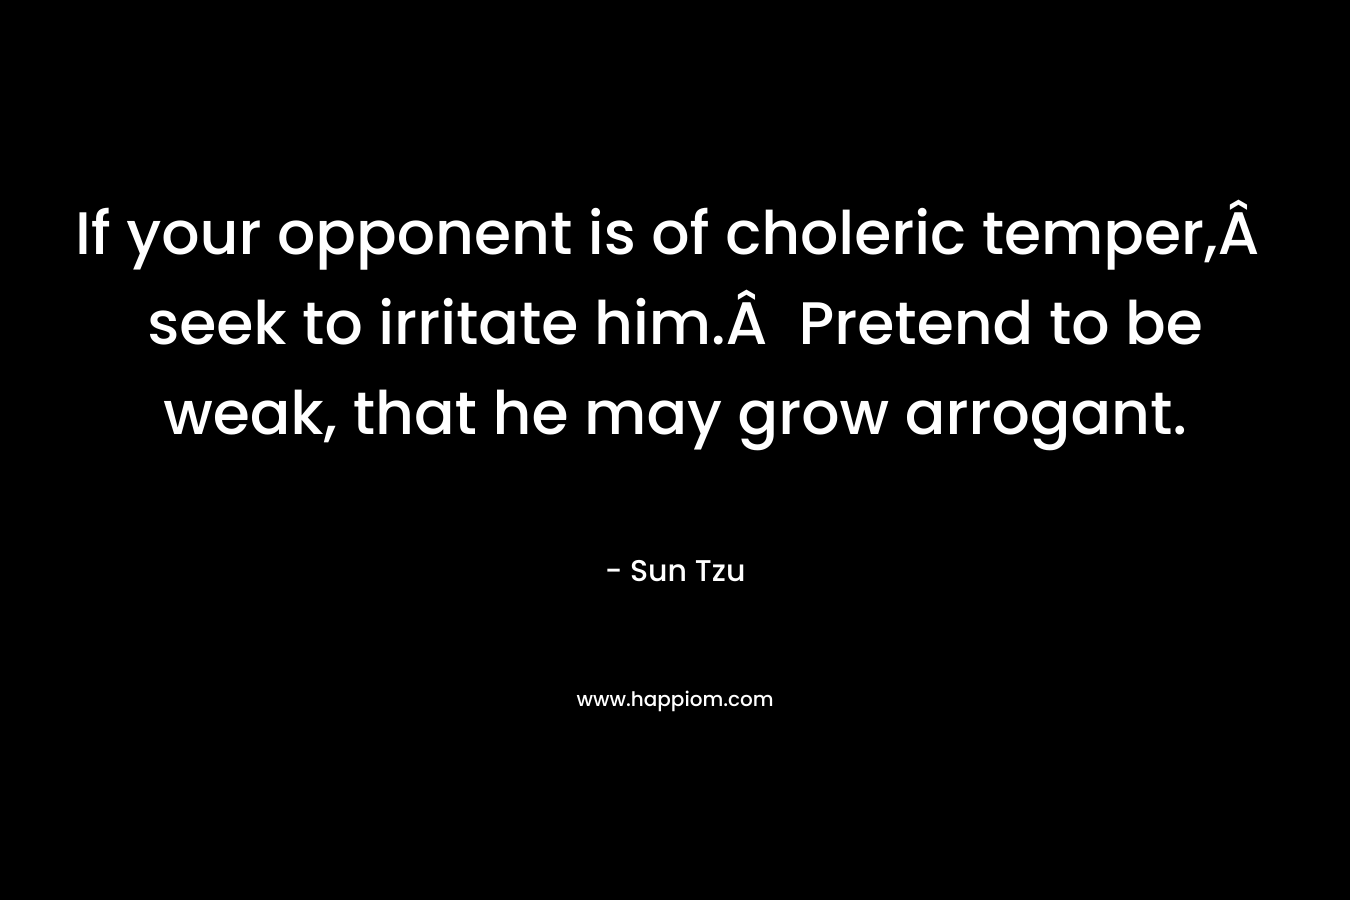 If your opponent is of choleric temper,Â  seek to irritate him.Â  Pretend to be weak, that he may grow arrogant.